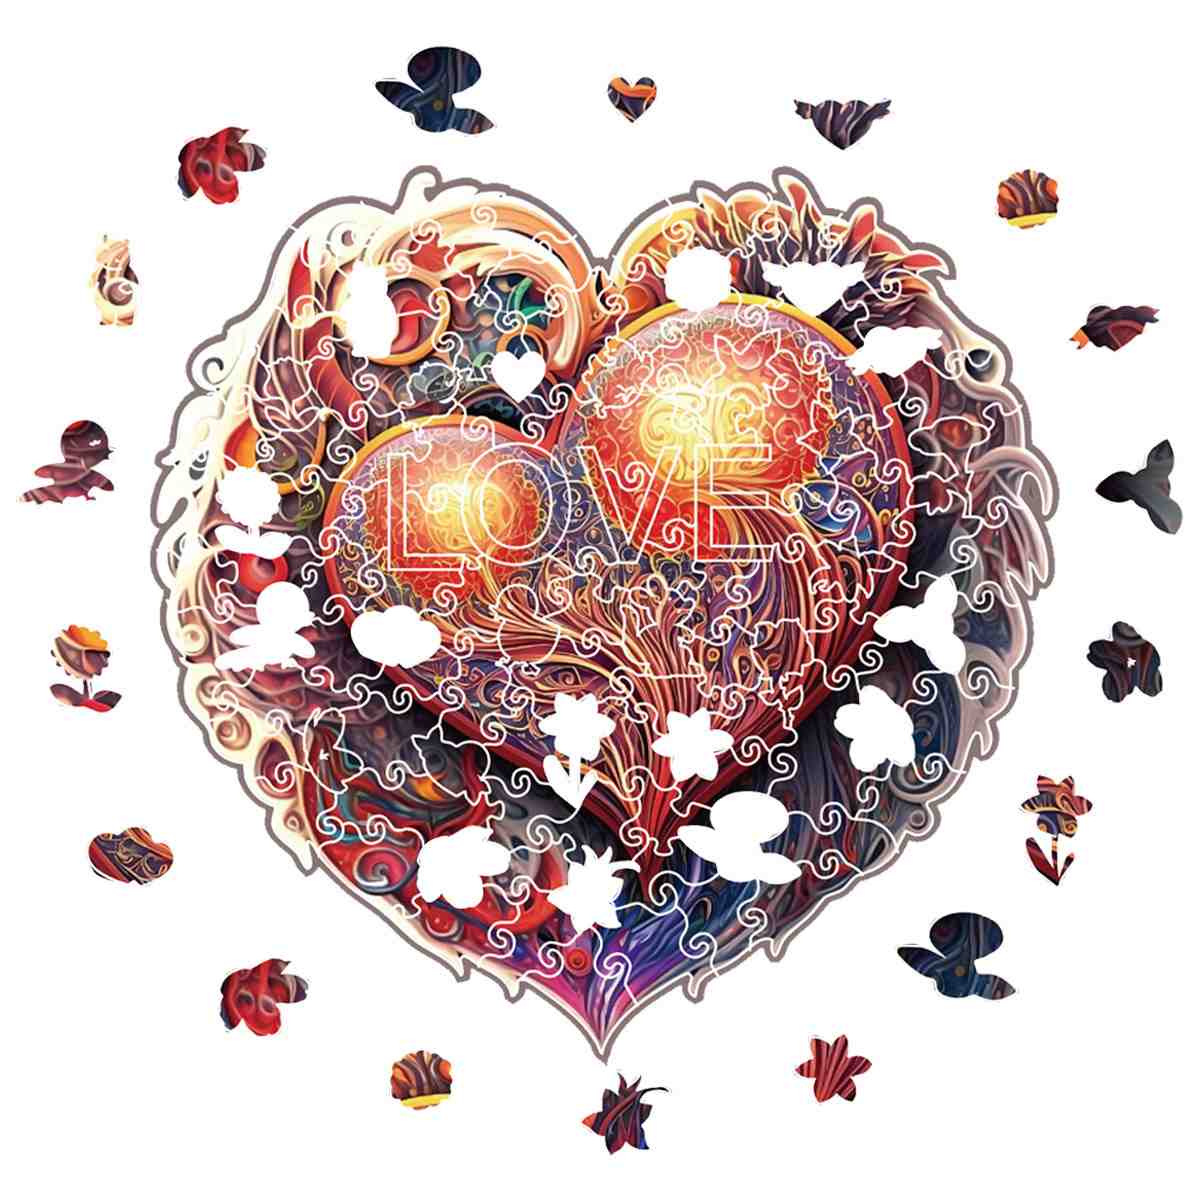 Animal Jigsaw Puzzle > Wooden Jigsaw Puzzle > Jigsaw Puzzle Blossom Heart - Jigsaw Puzzle